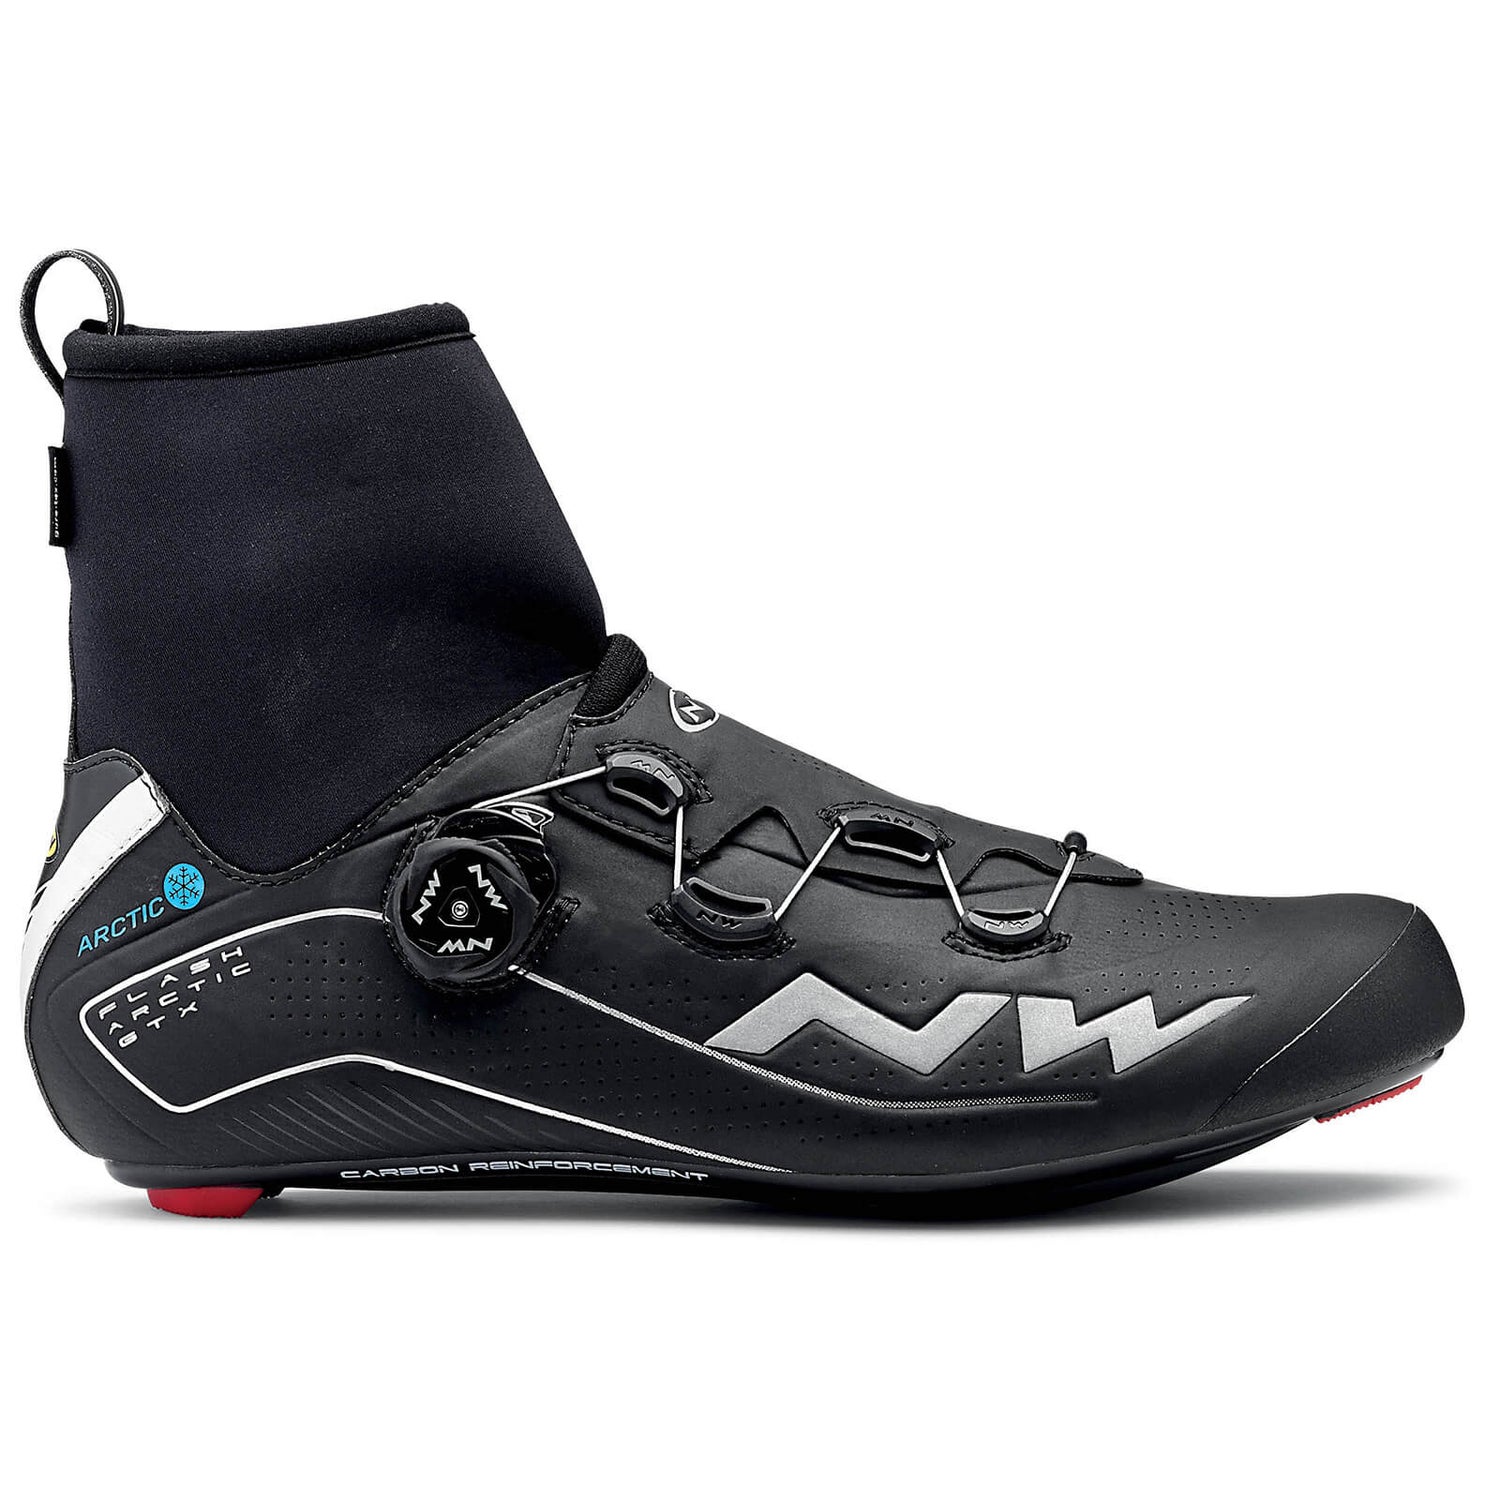 New Northwave Flash Arctic GTX winter cycling shoes 42 UK8.5 black 